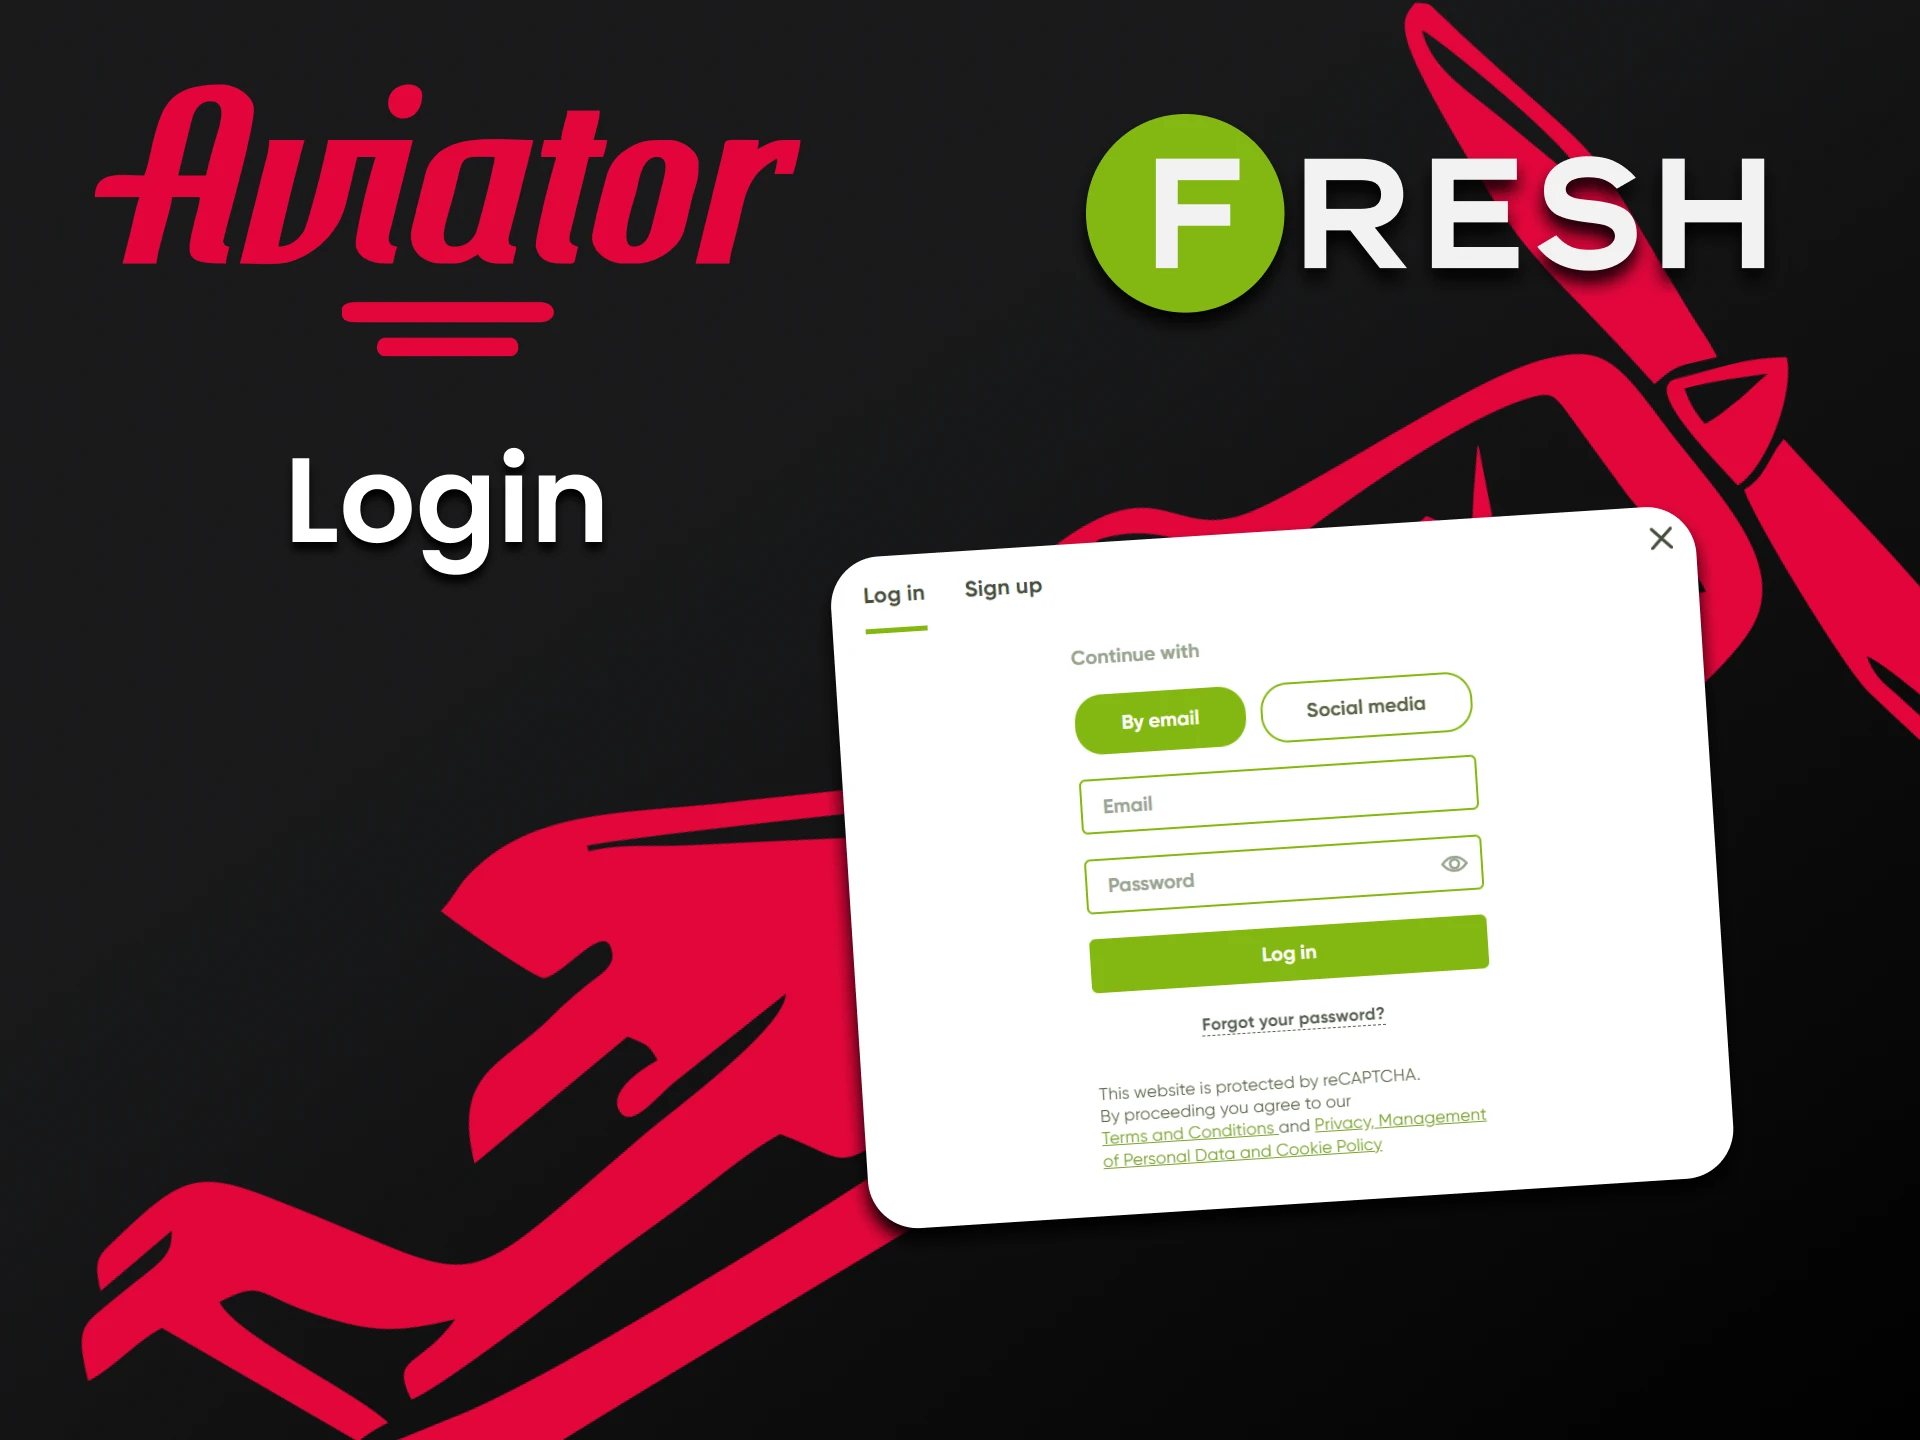 Log in to your Frash Casino account to play Aviator.